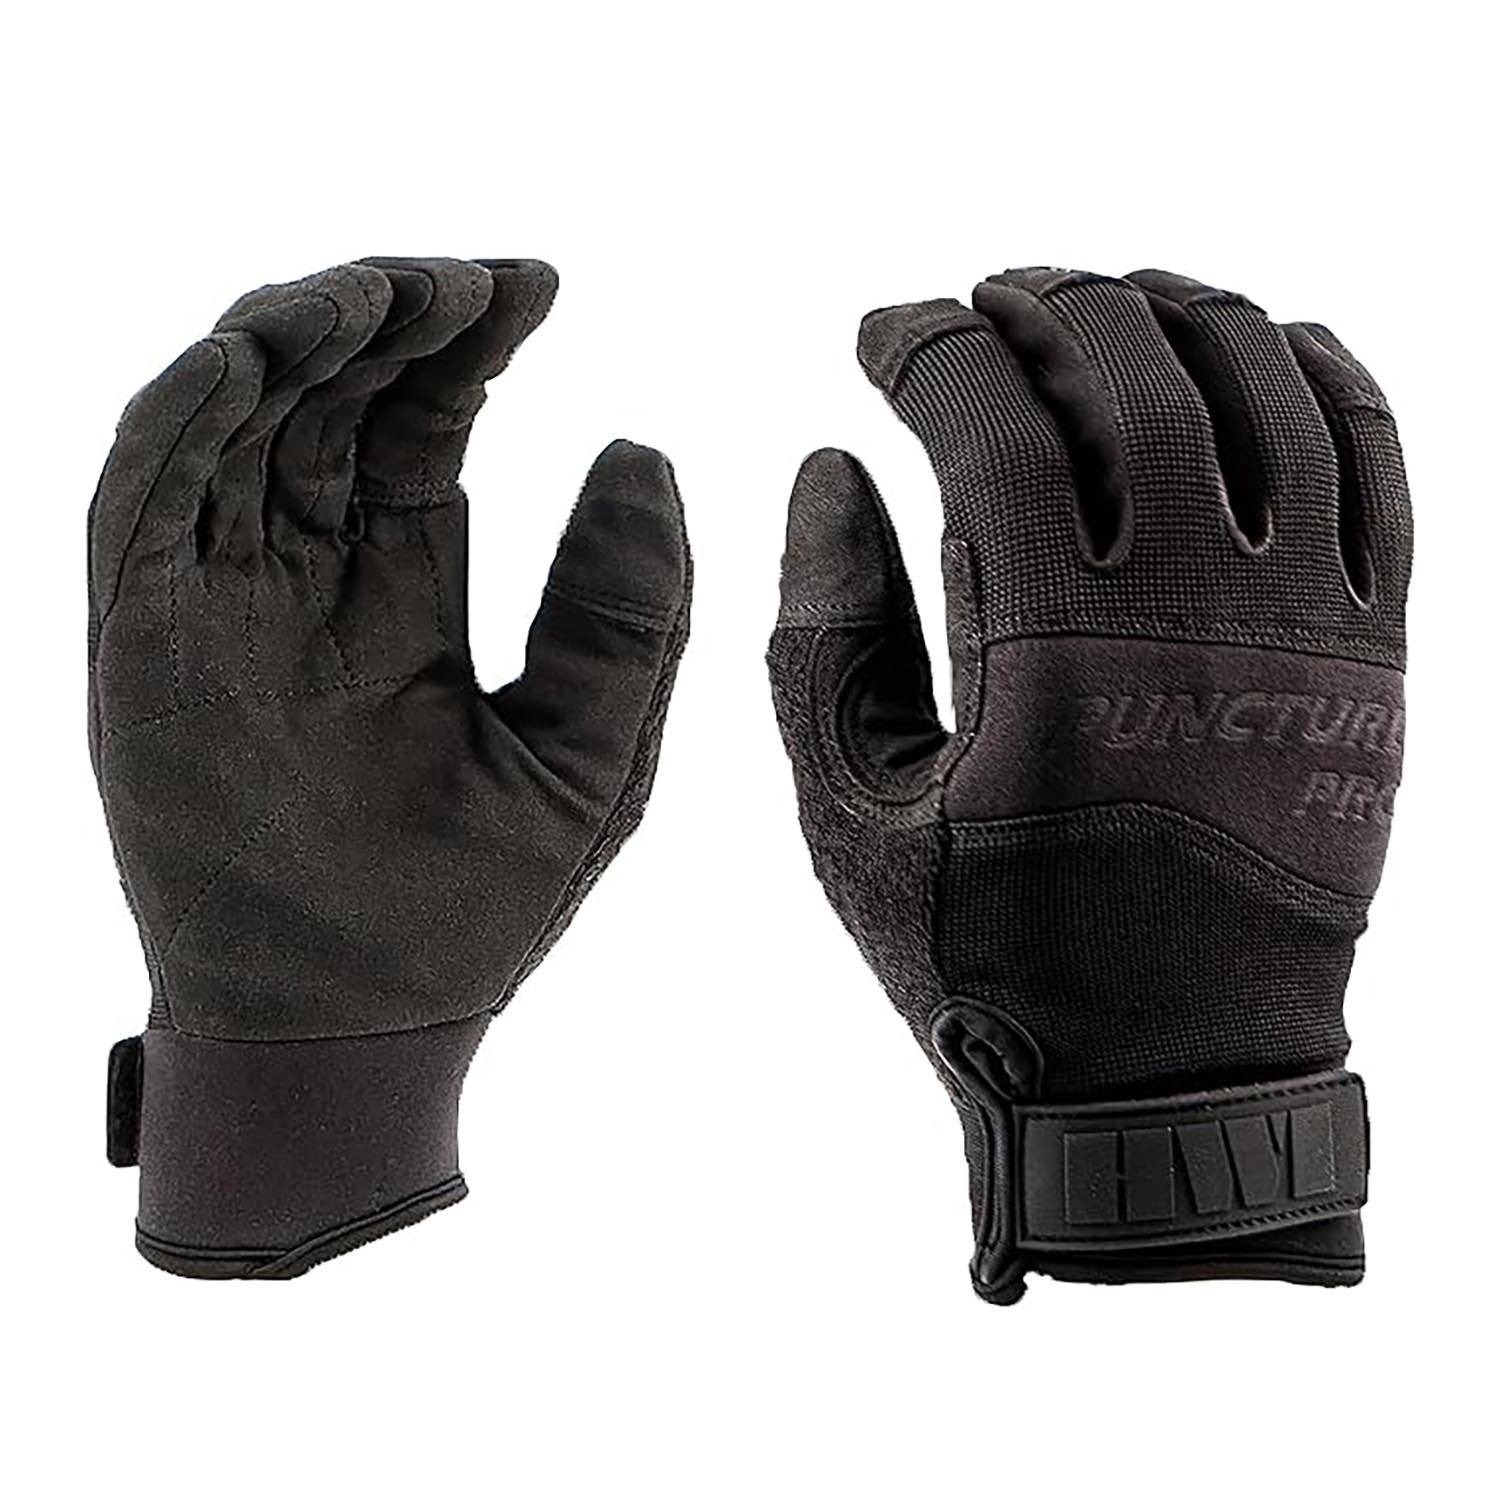 HWI Gear Puncture Pro Needle Protective Gloves